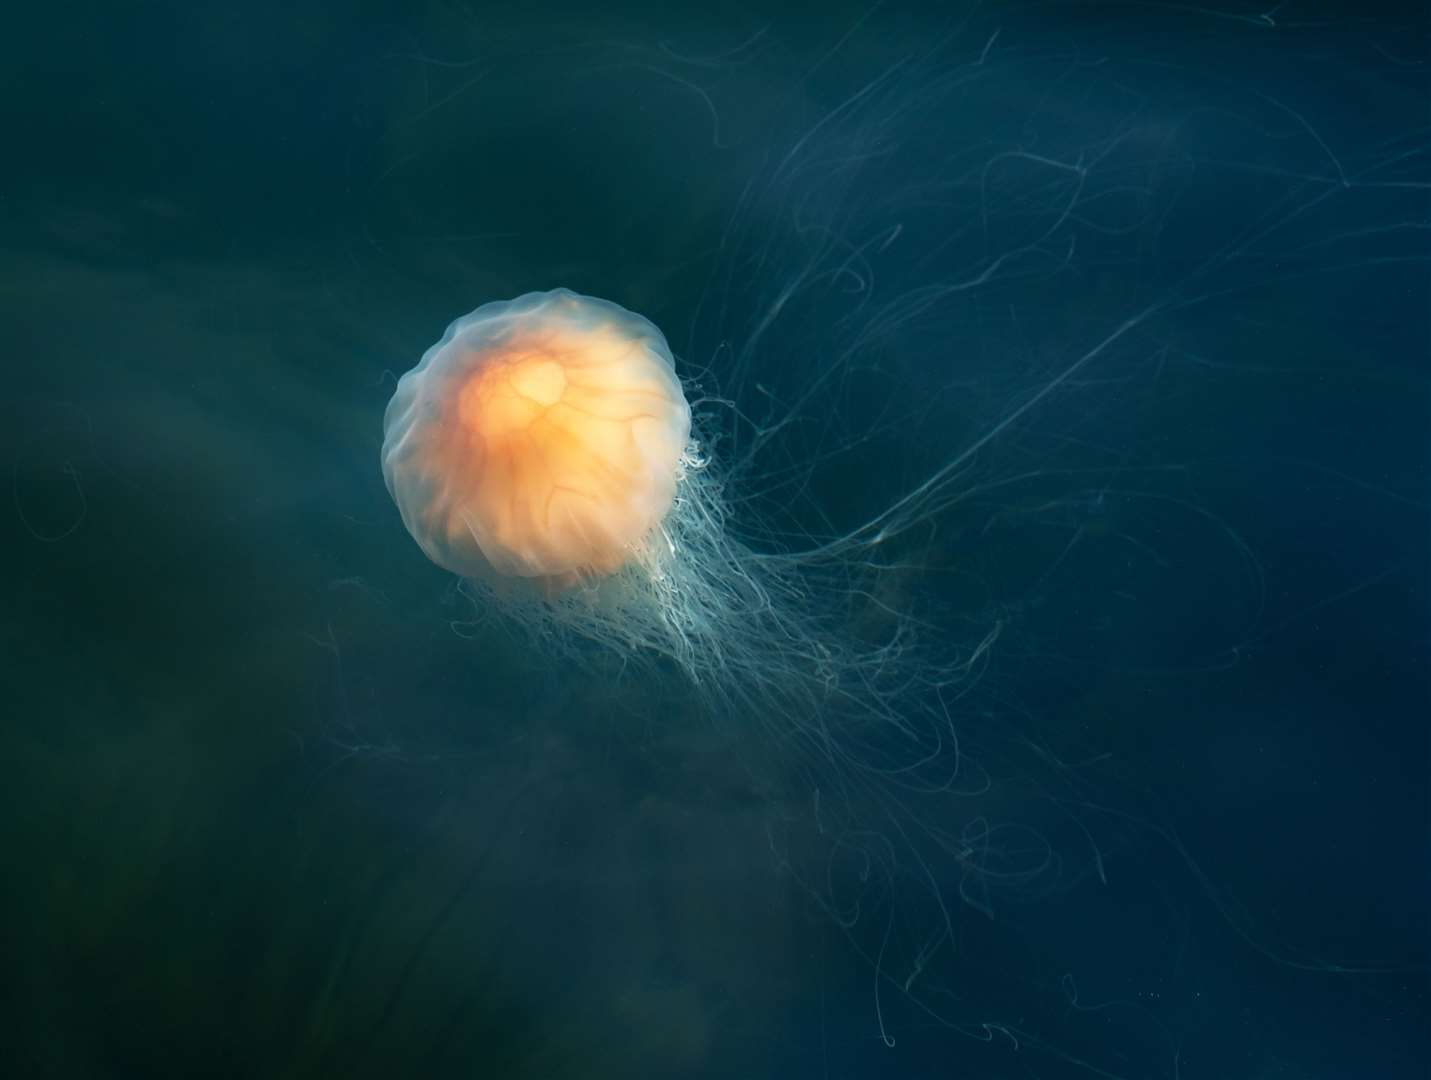 The Lion's Mane jellyfish is a common sight in Scottish waters. Their stinging tentacles can extend a long way from their bell.